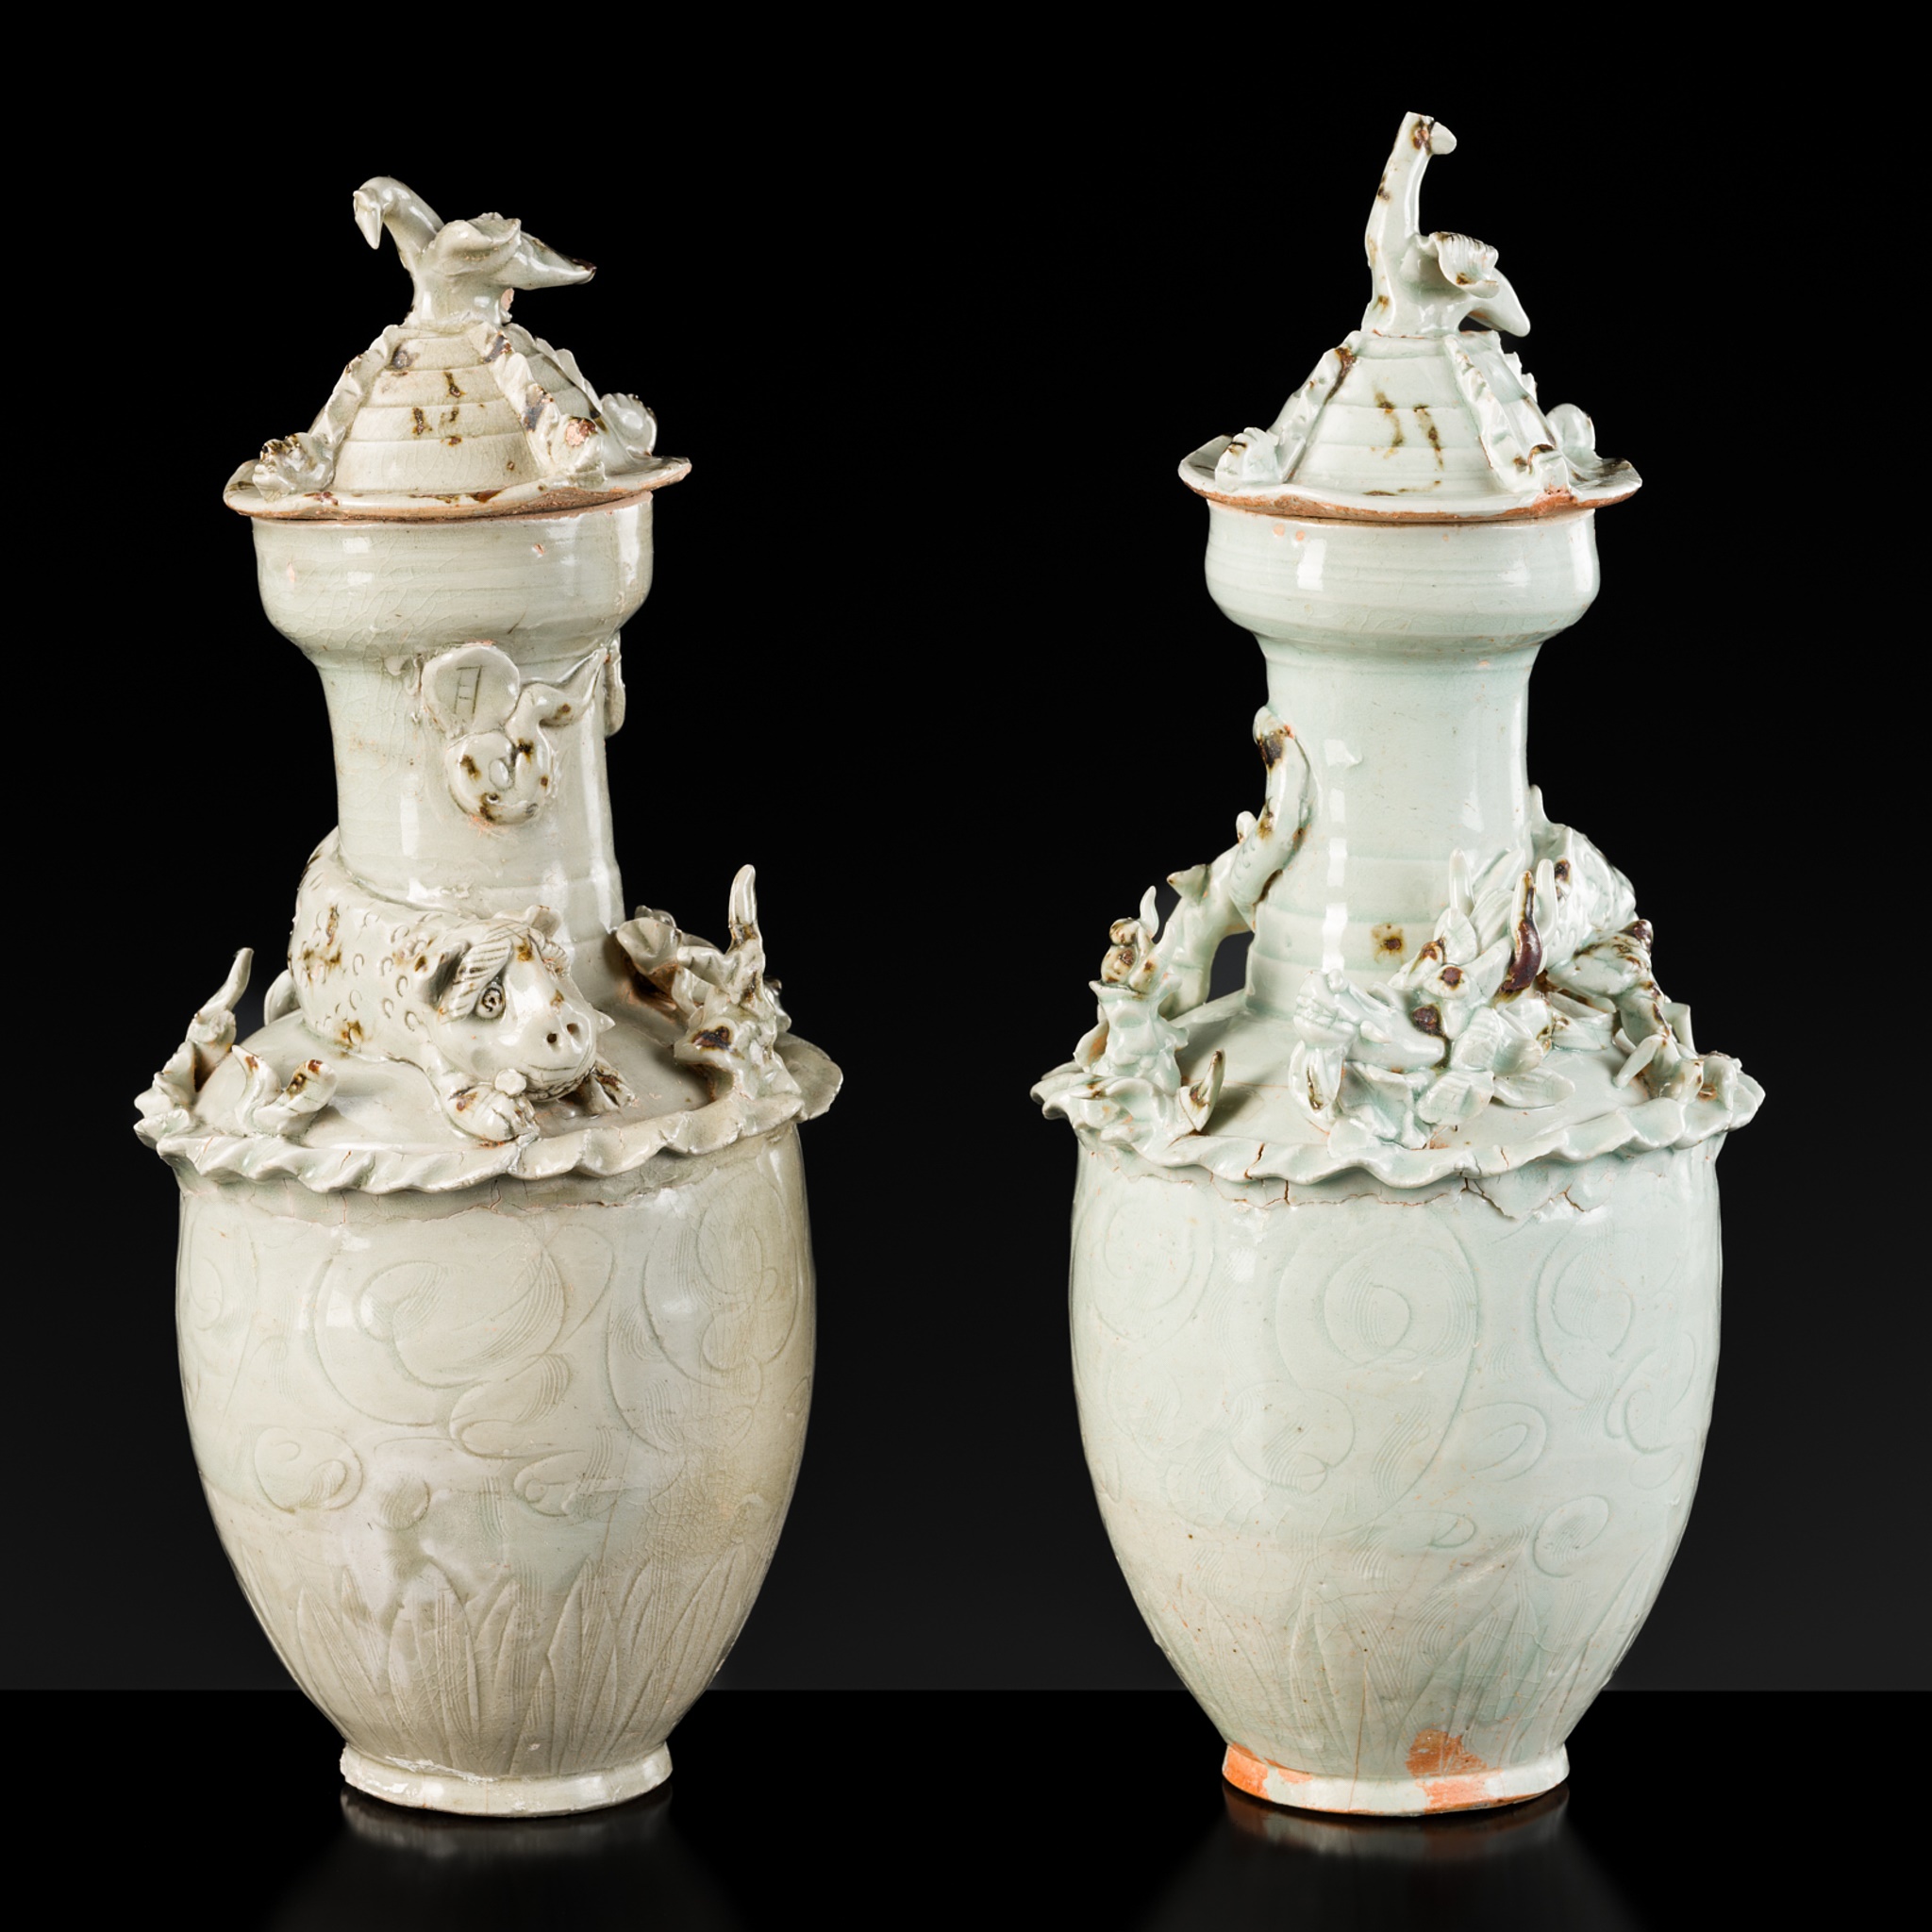 A PAIR OF QINGBAI FUNERARY JARS AND COVERS, SONG DYNASTY